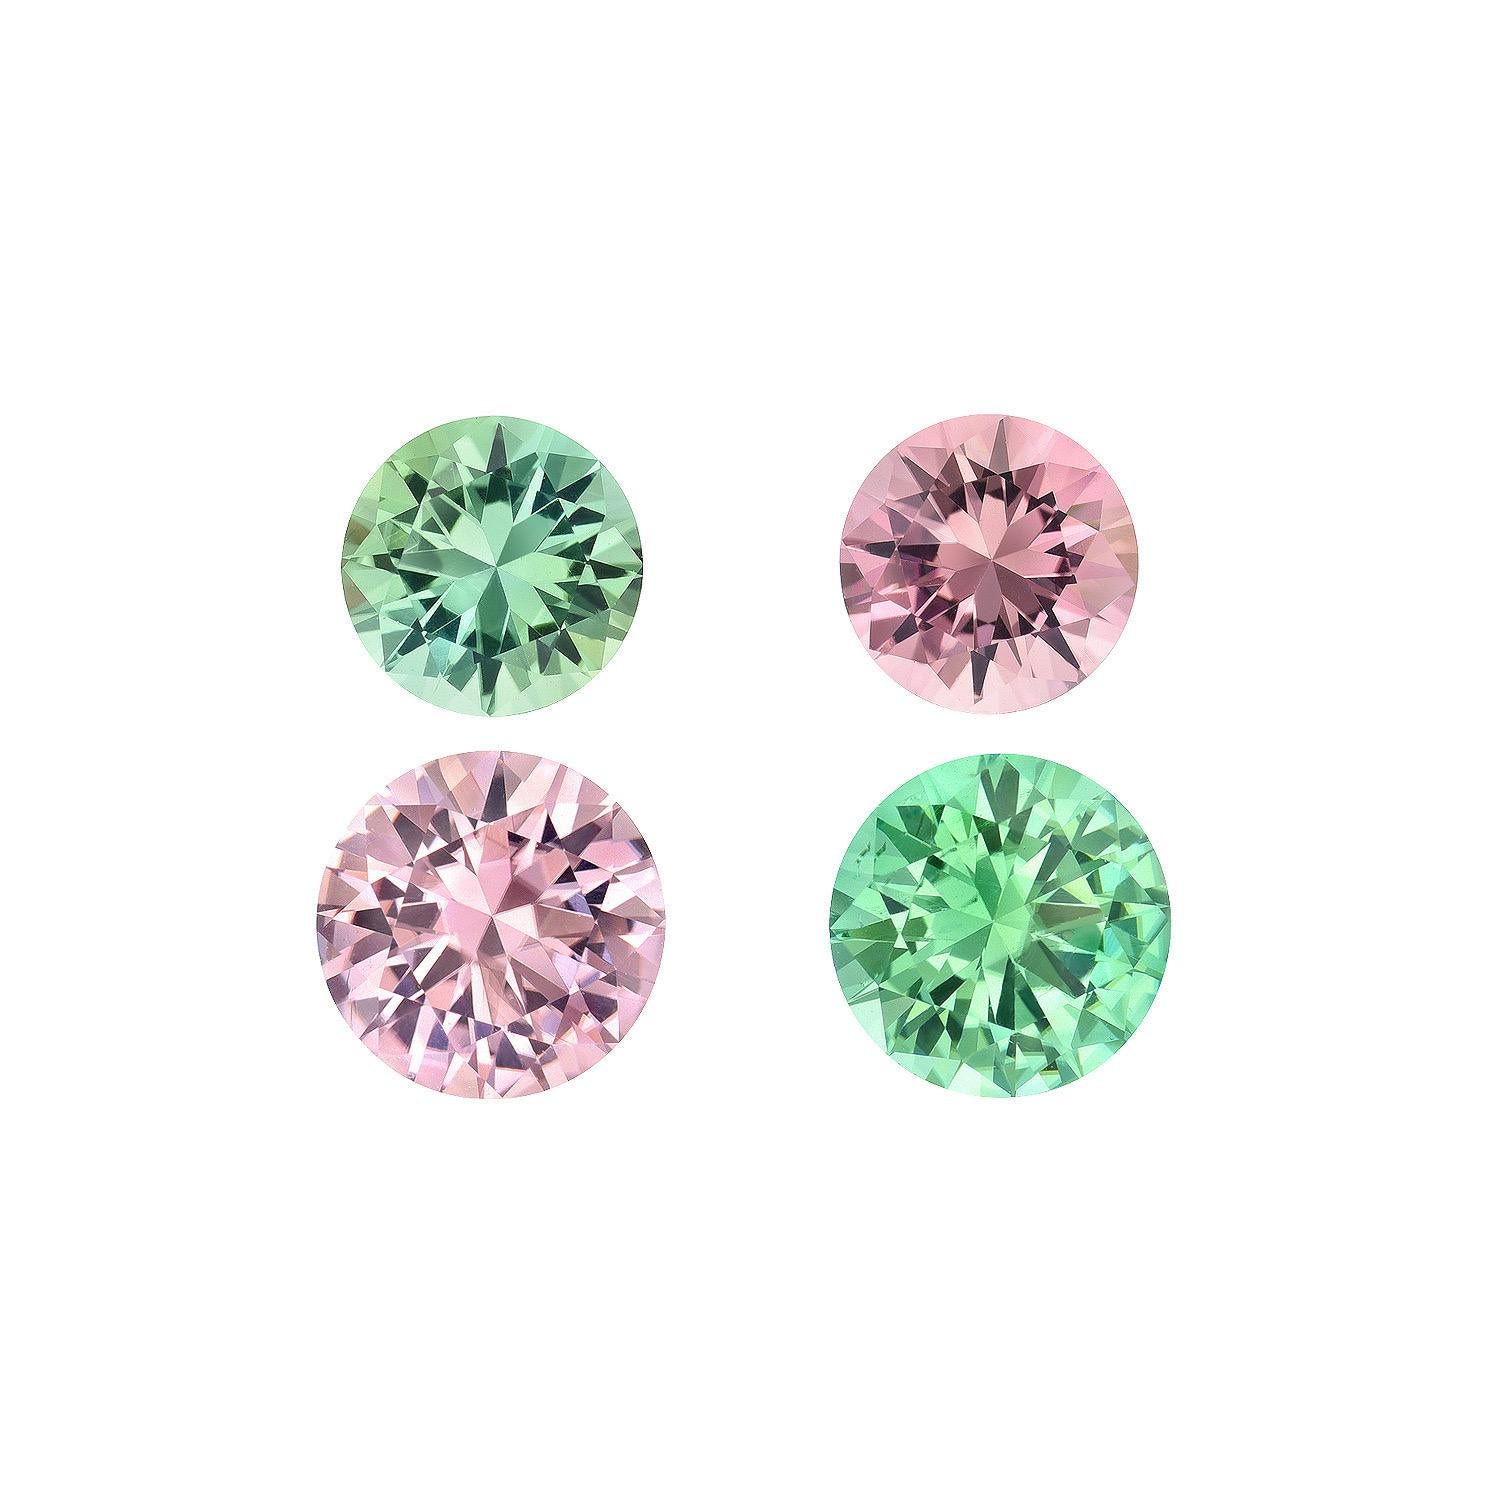 Contemporary Pink Green Tourmaline Earrings Set 3.40 Carats Round Loose Gemstones For Sale